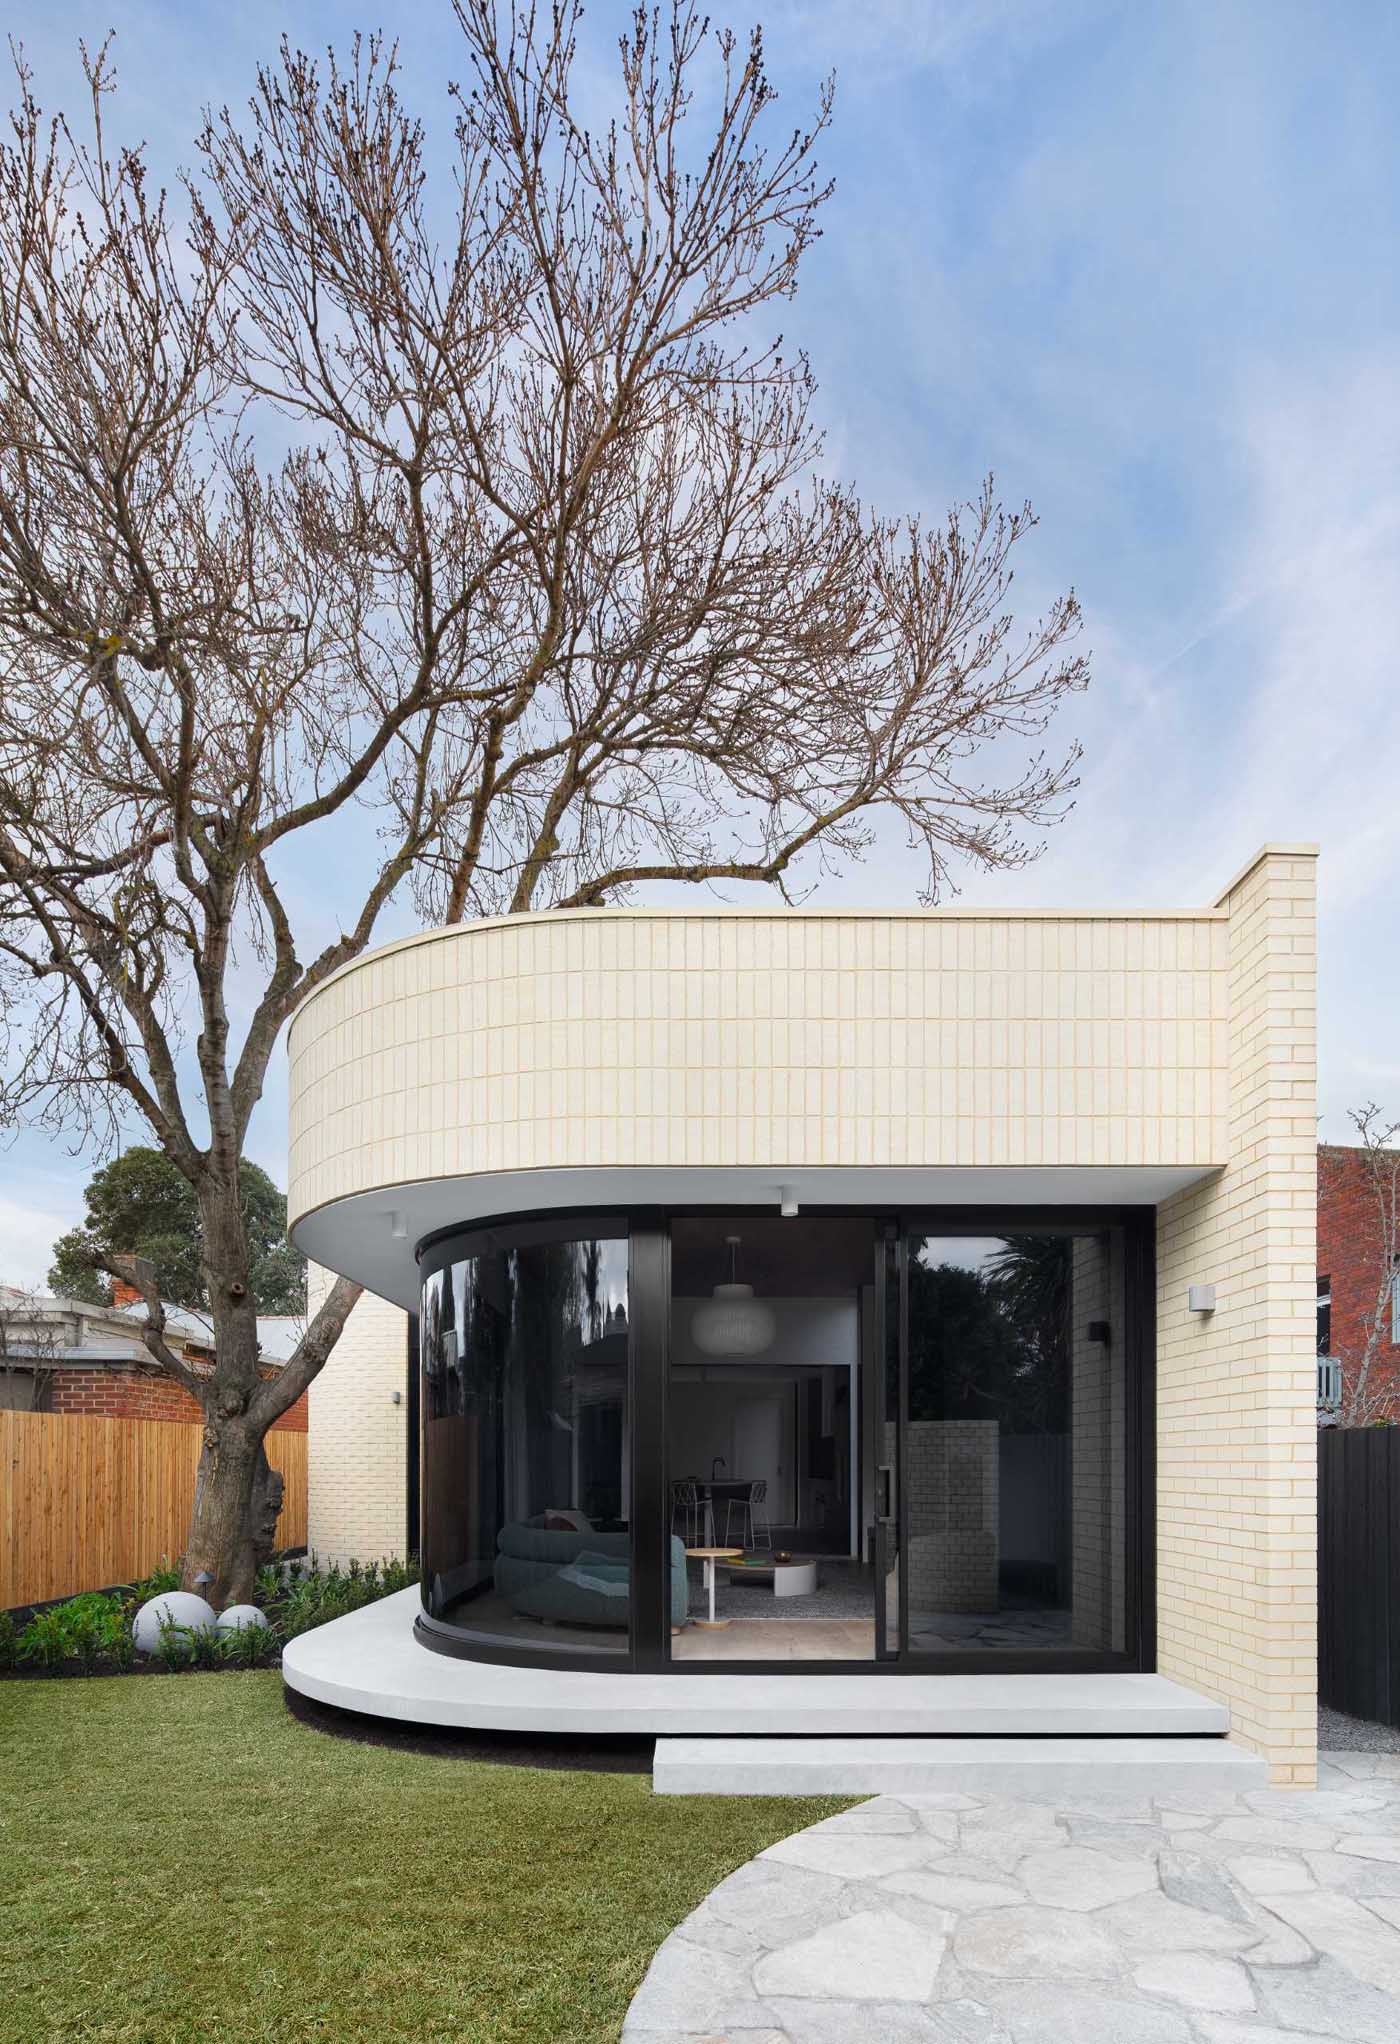 A modern light brick rear addition with a curved design and openings that connect the interior with outdoor spaces.